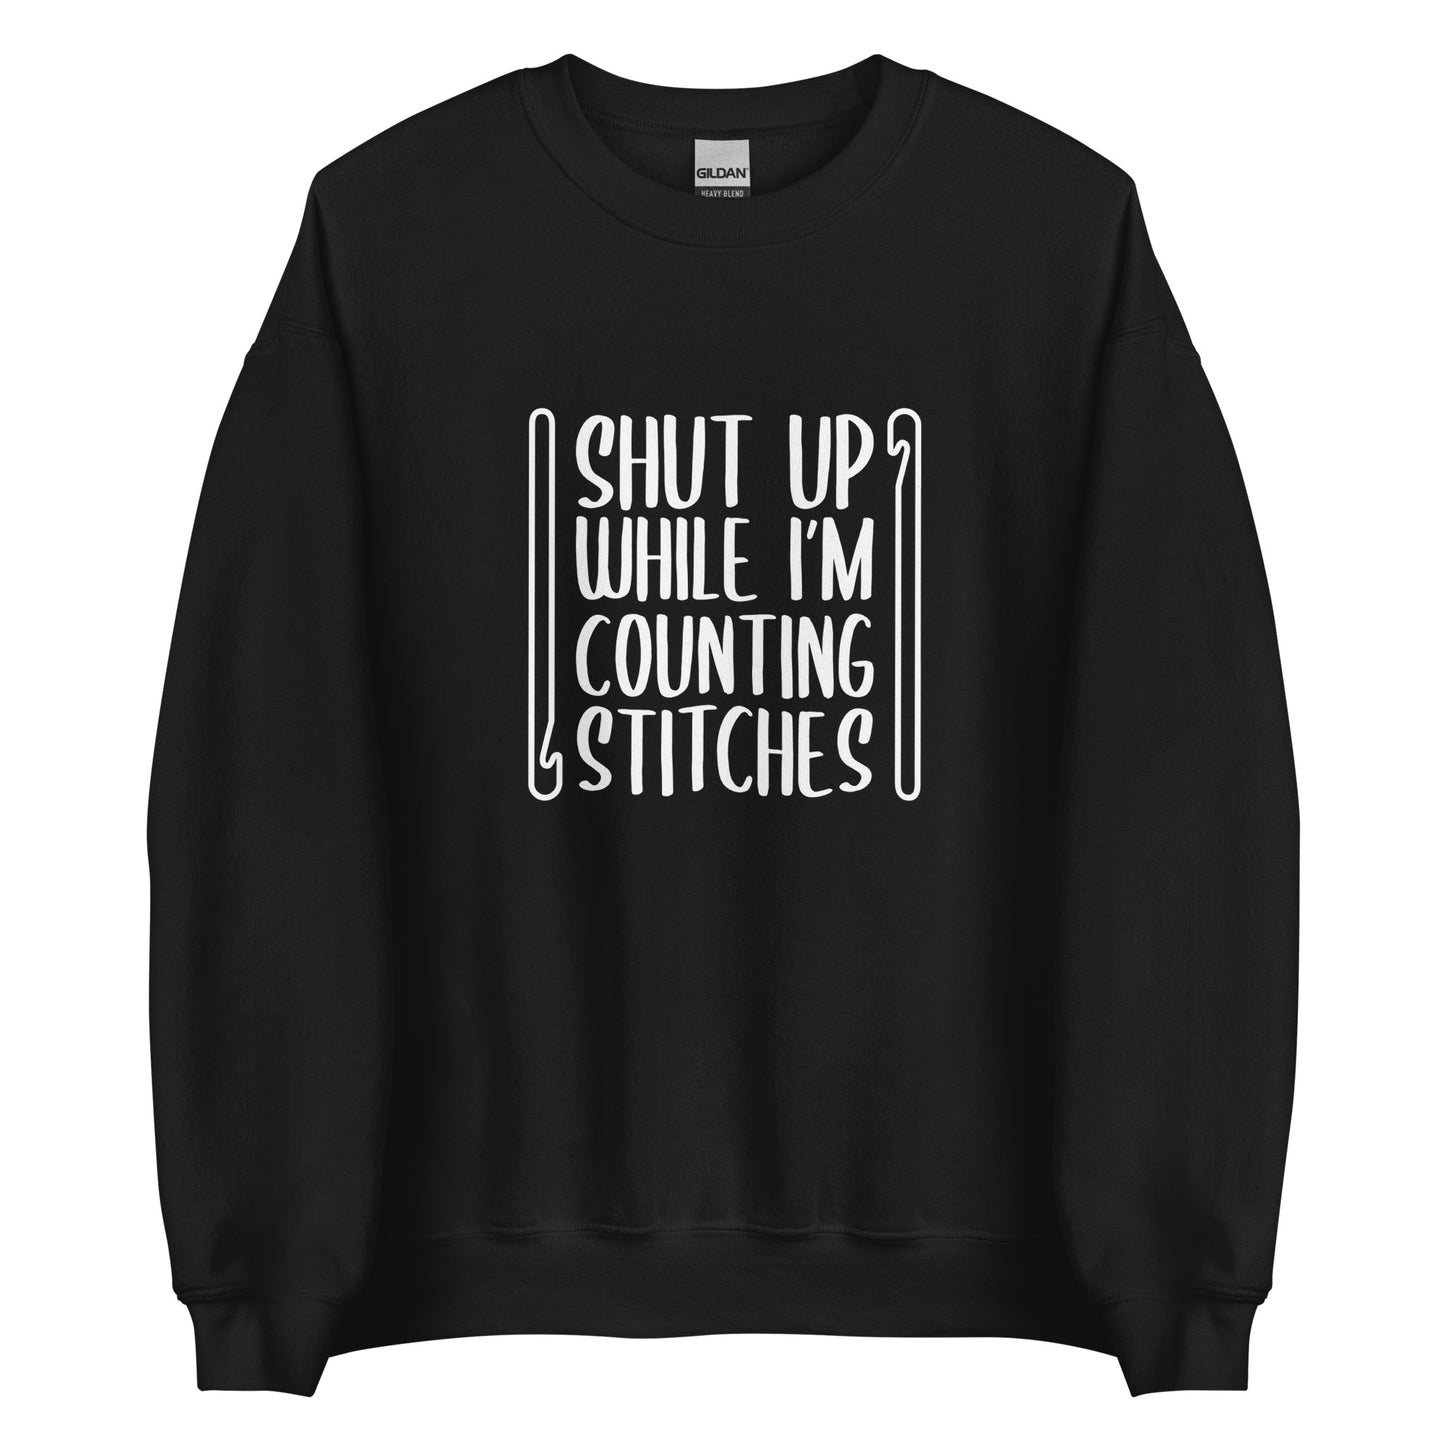 A black crewneck sweatshirt featuring white text that reads "Shut up while I'm counting stitches." The text is framed by a crochet hook to the left and right.